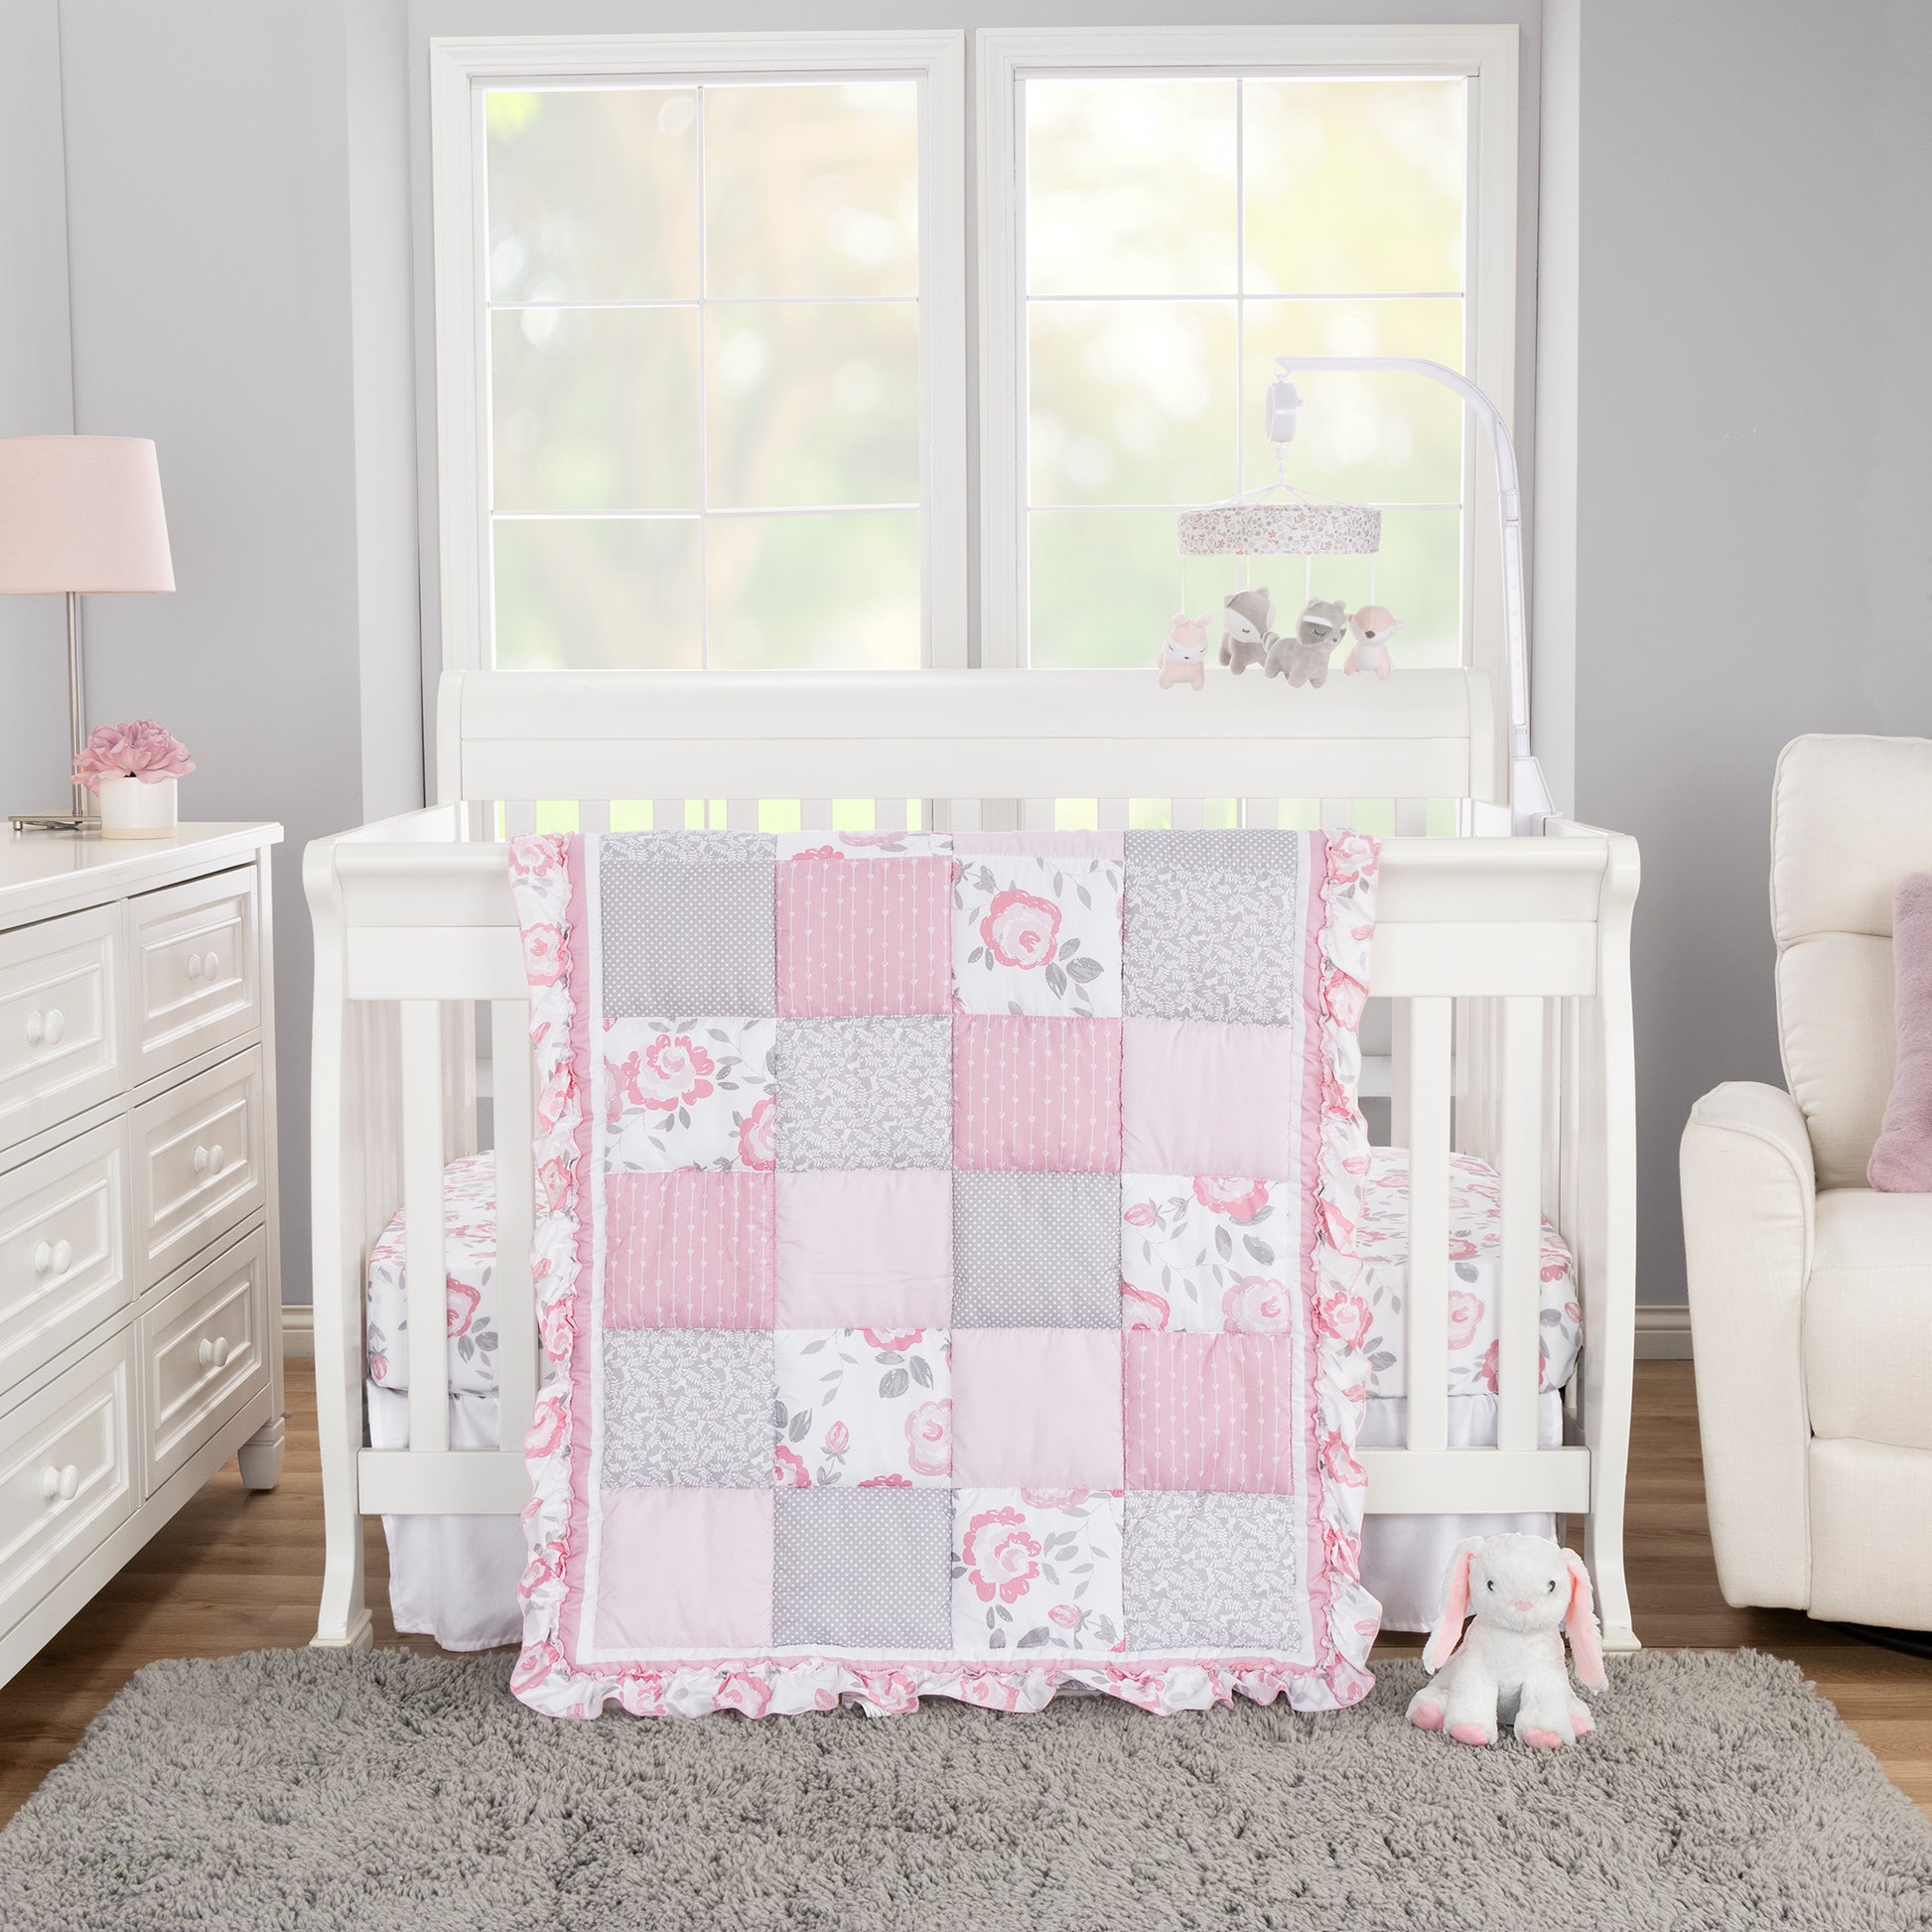 Emma 4 Piece Crib Bedding Collection by Sammy and Lou in a stylized room main image